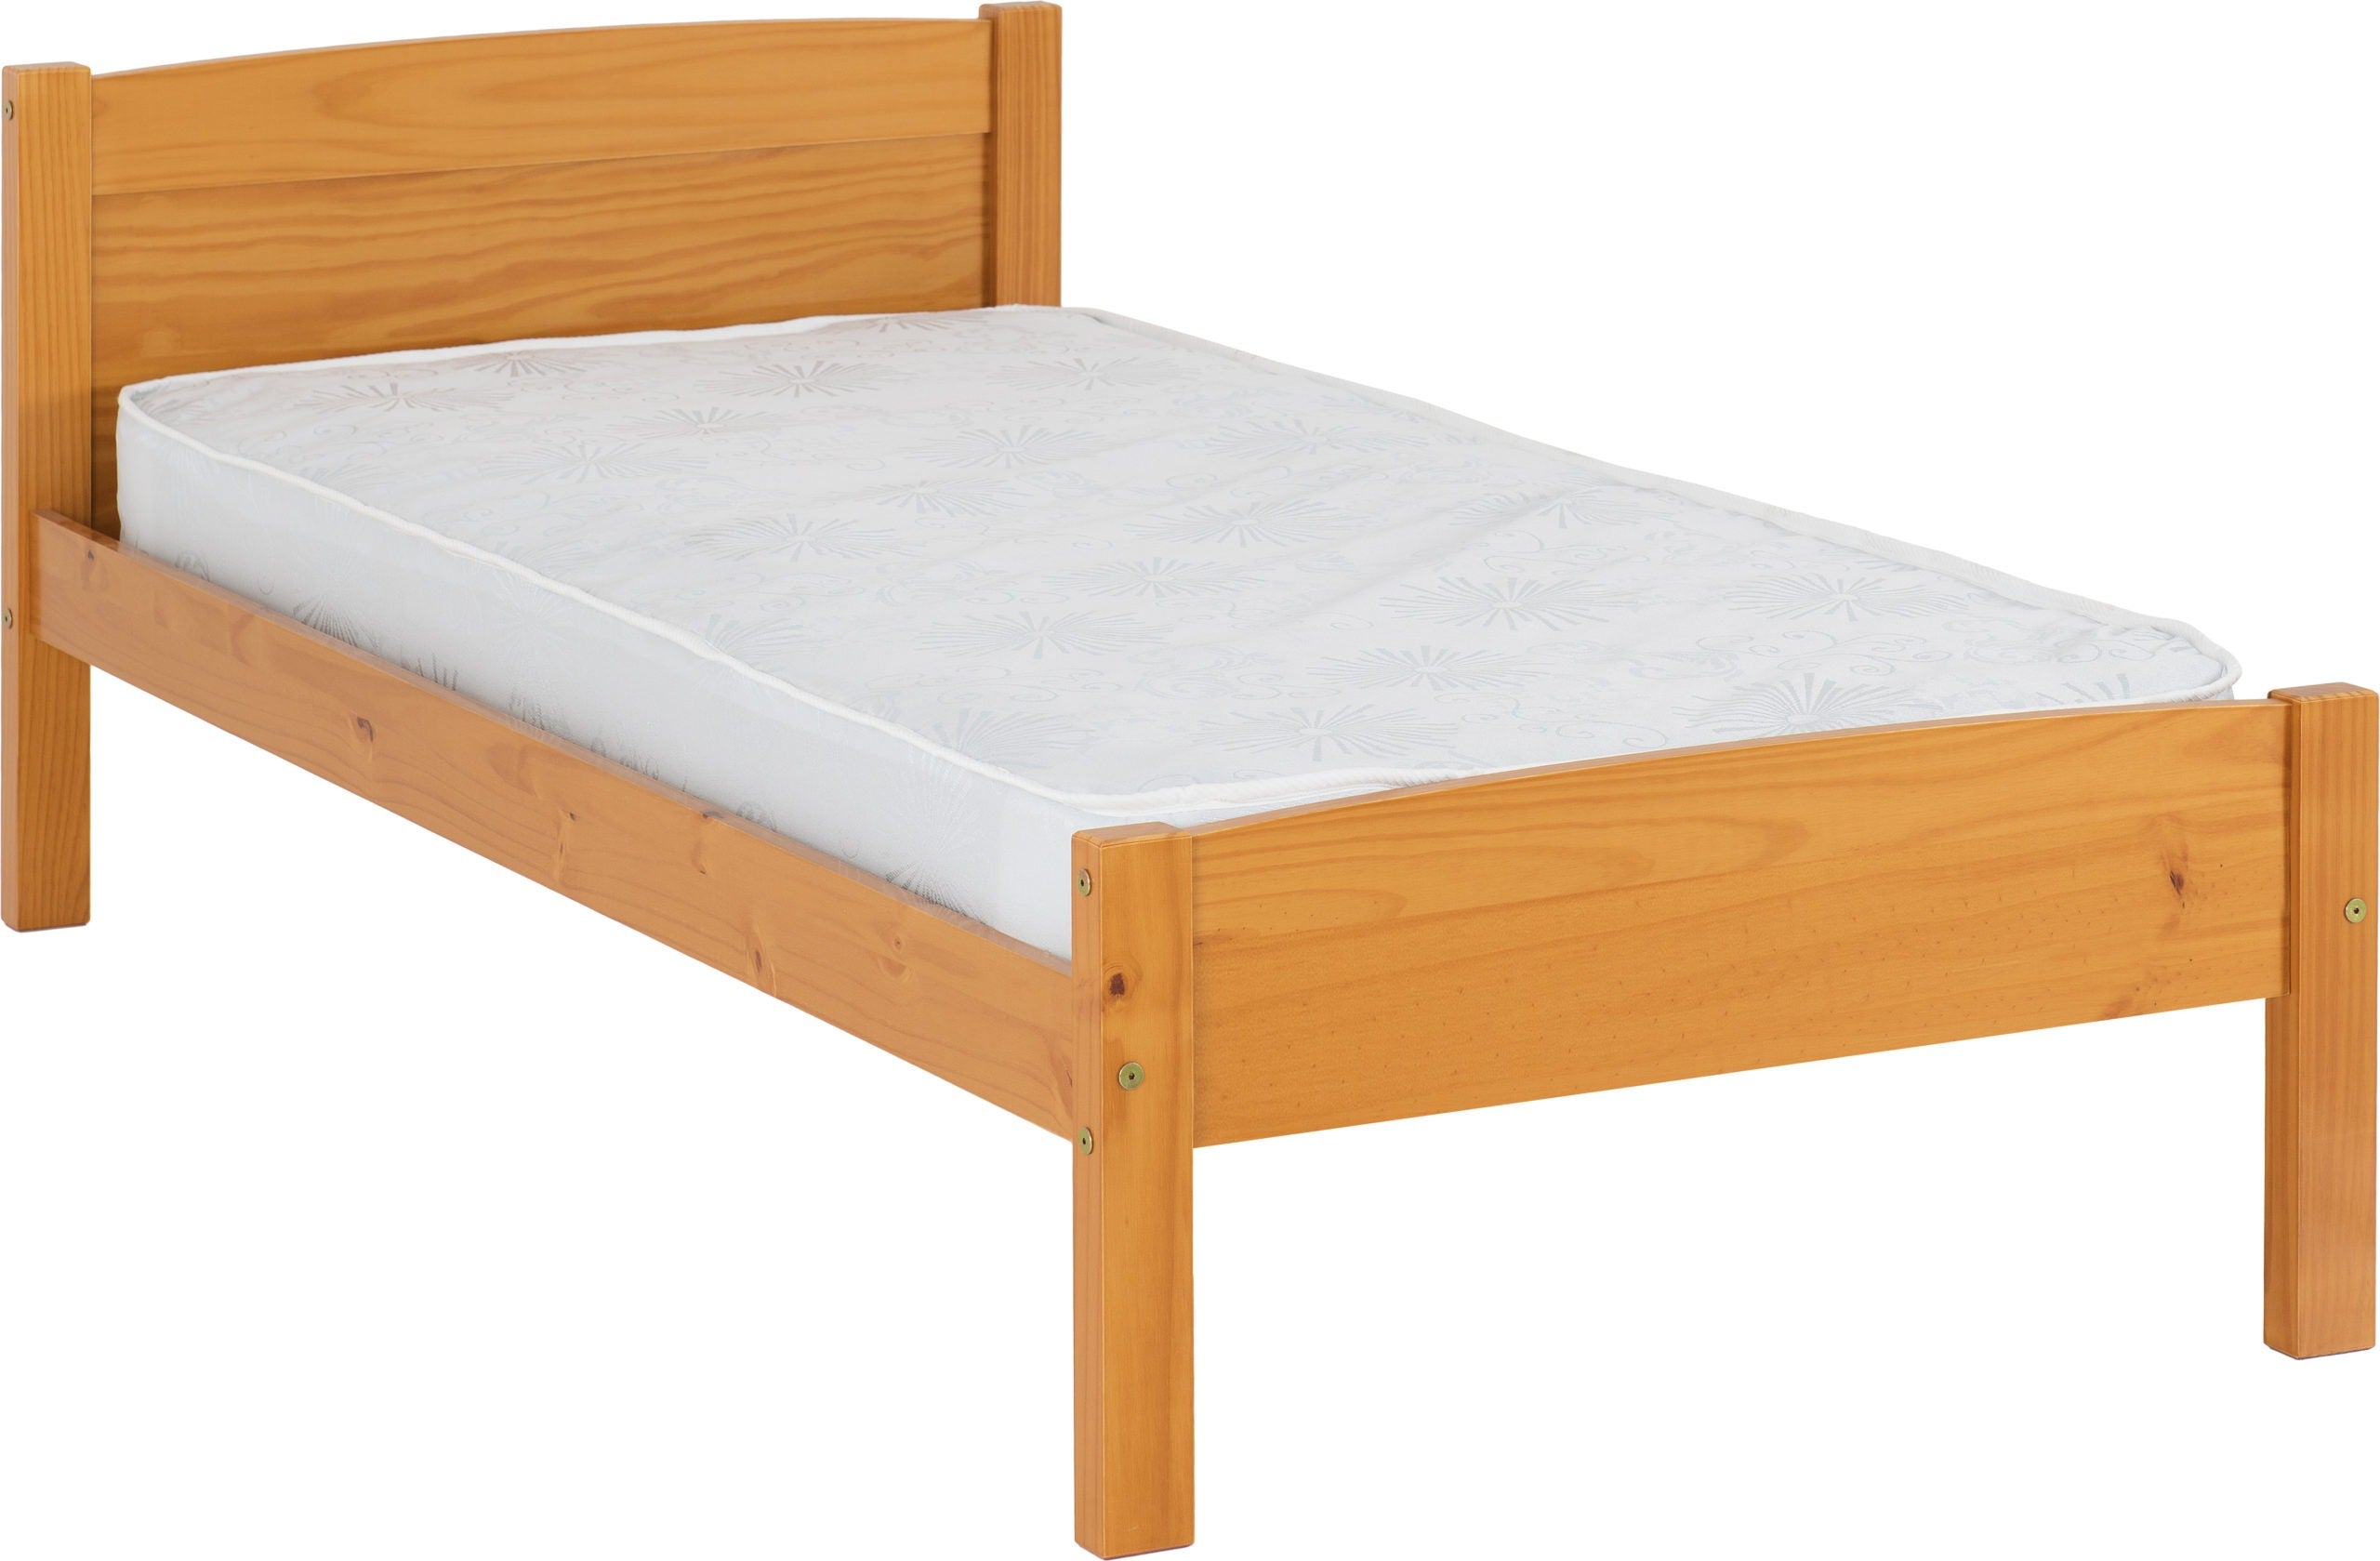 Amber 3' Bed - Anqique Pine Wood Frame